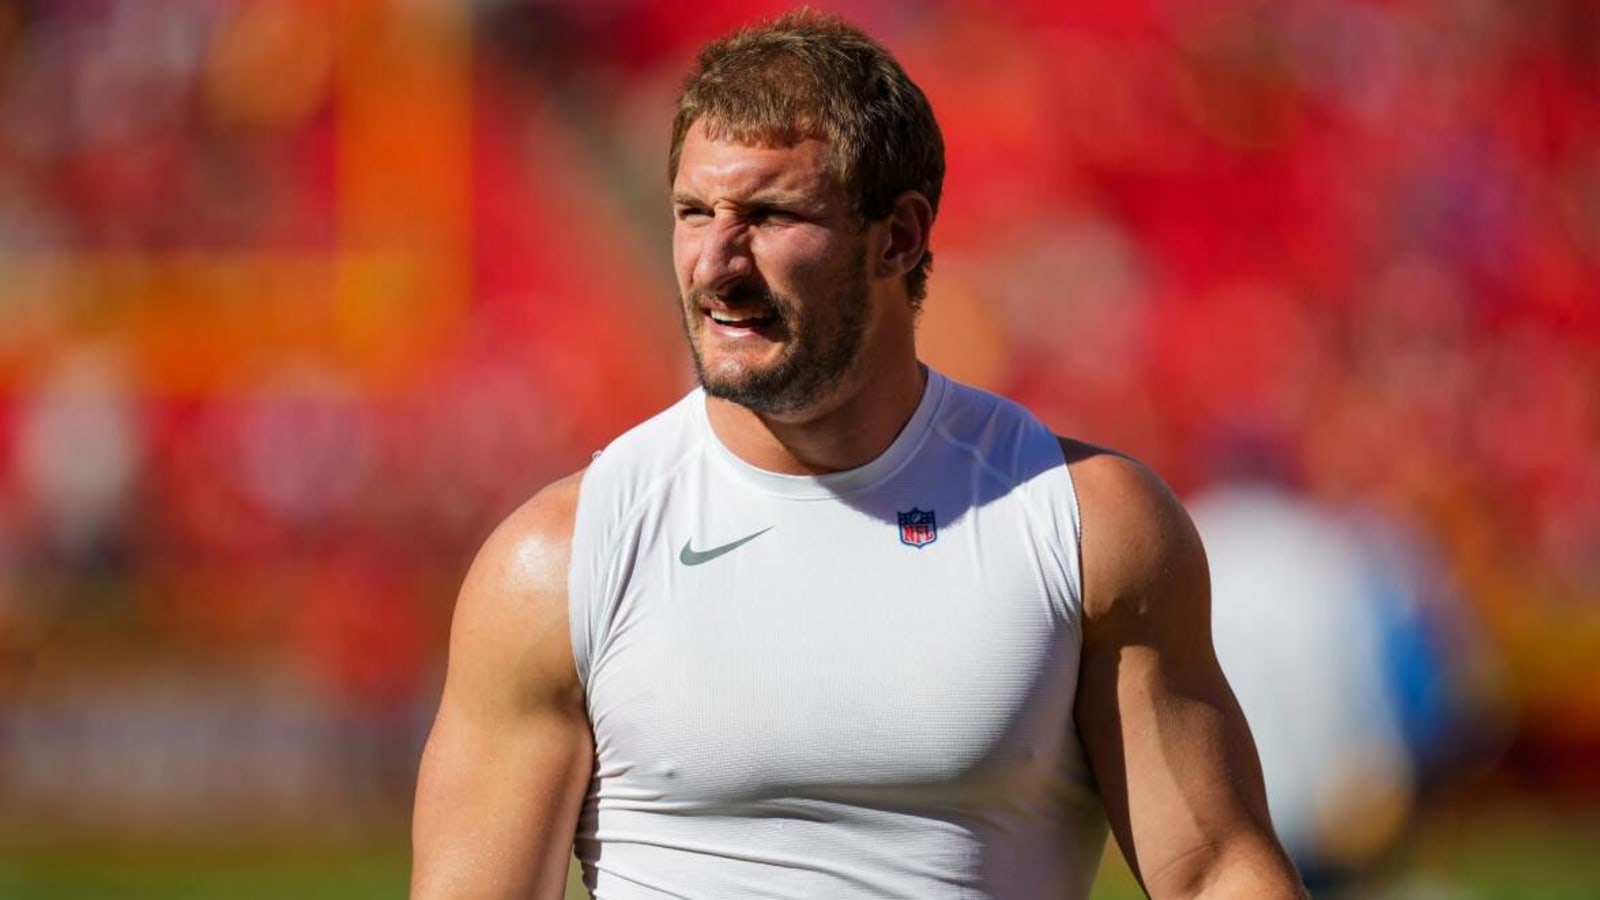 Joey Bosa to the 49ers Dream Comes to an end